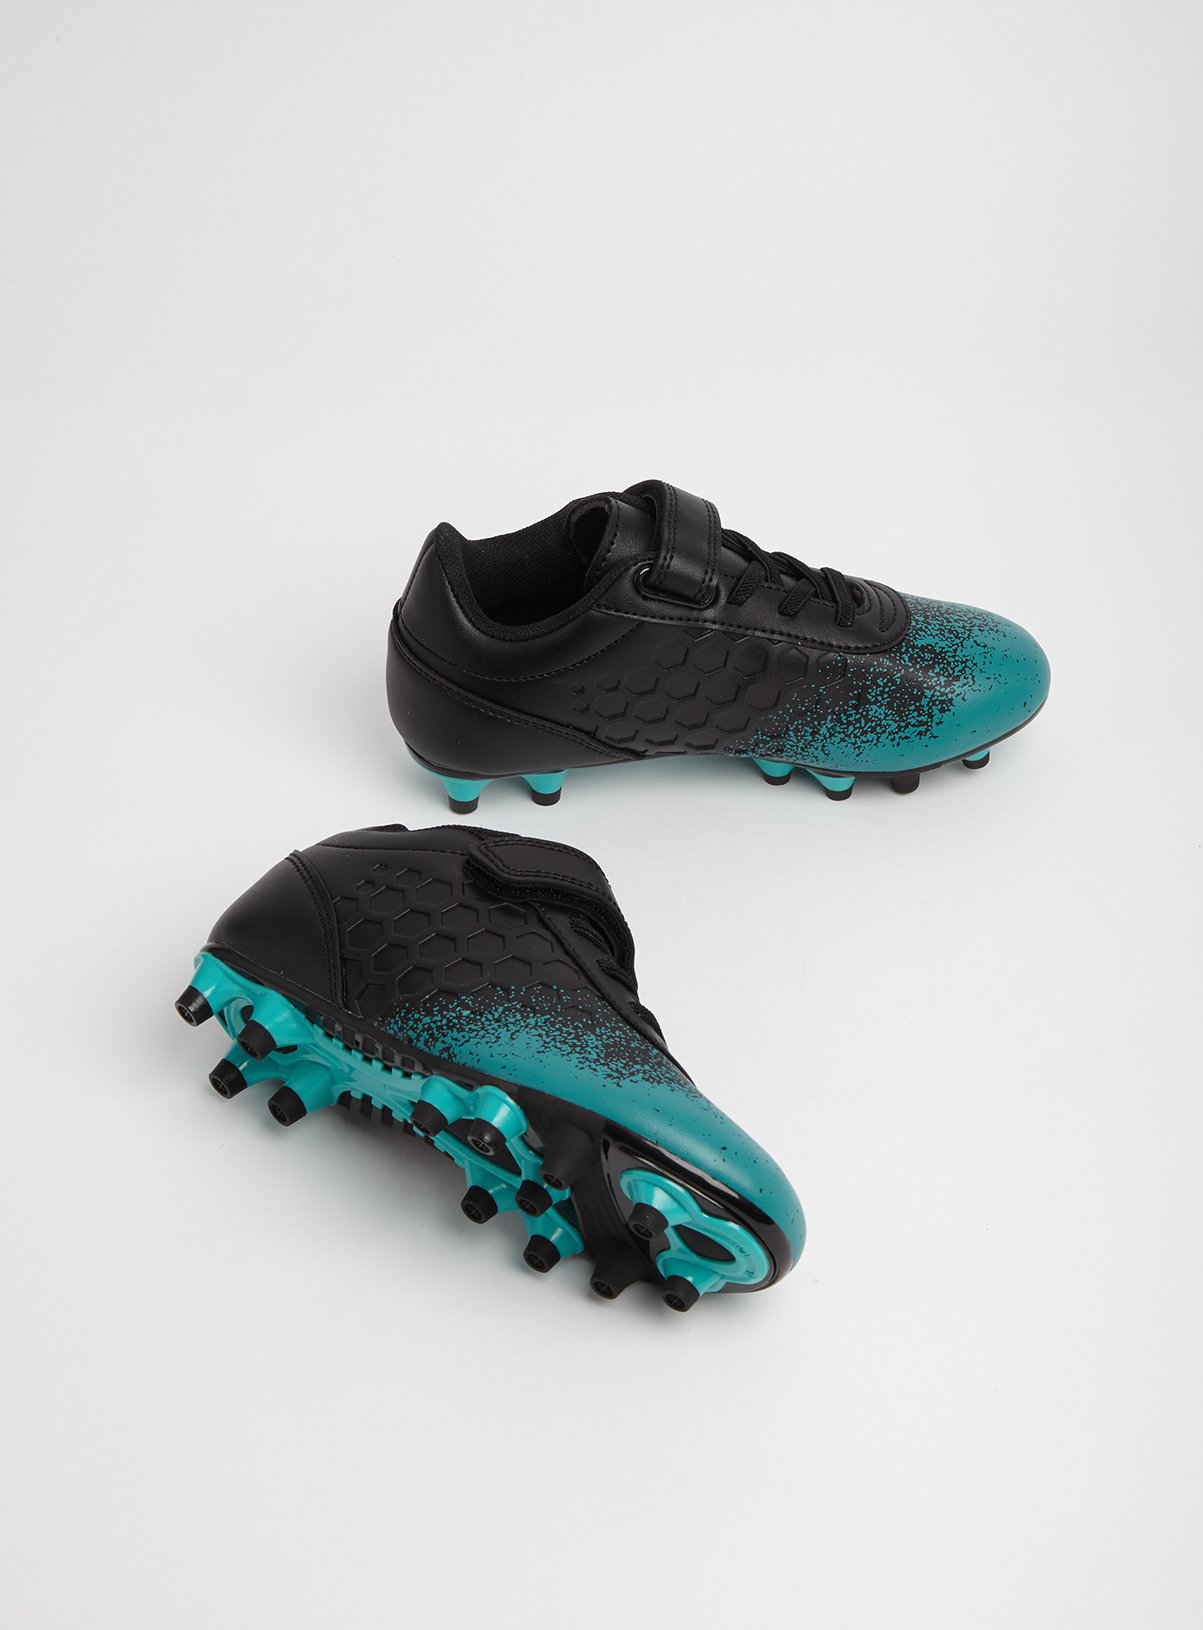 Black & Teal Football Trainers Review